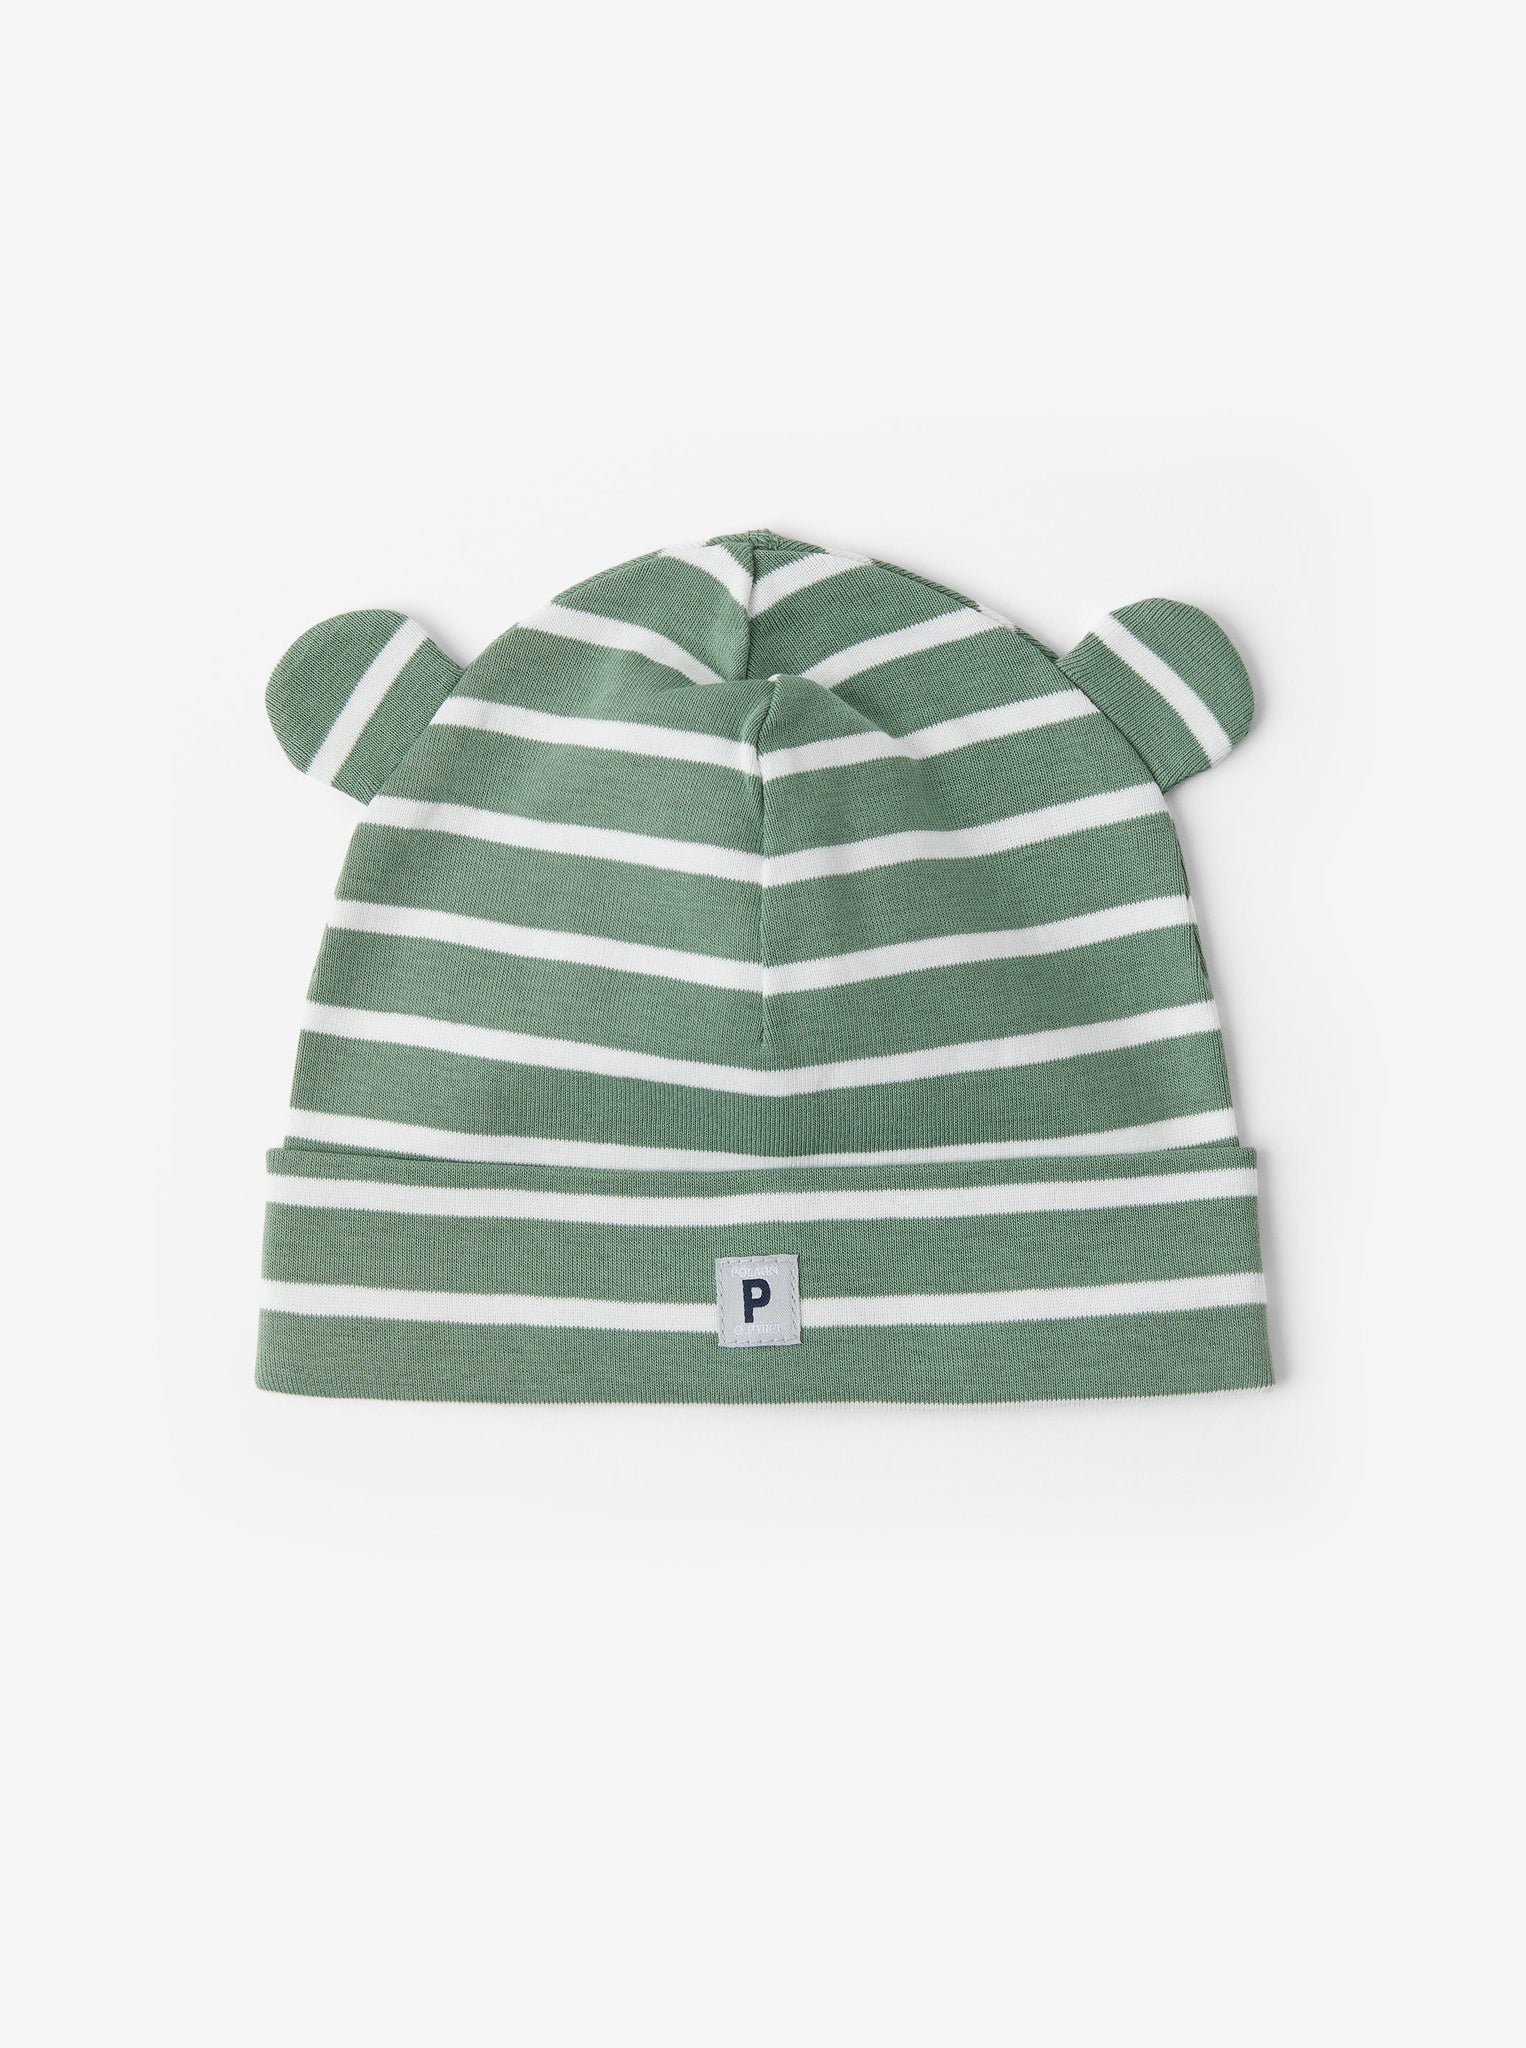 Organic Cotton Green Baby Beanie Hat from the Polarn O. Pyret Kidswear collection. Ethically produced kids clothing.